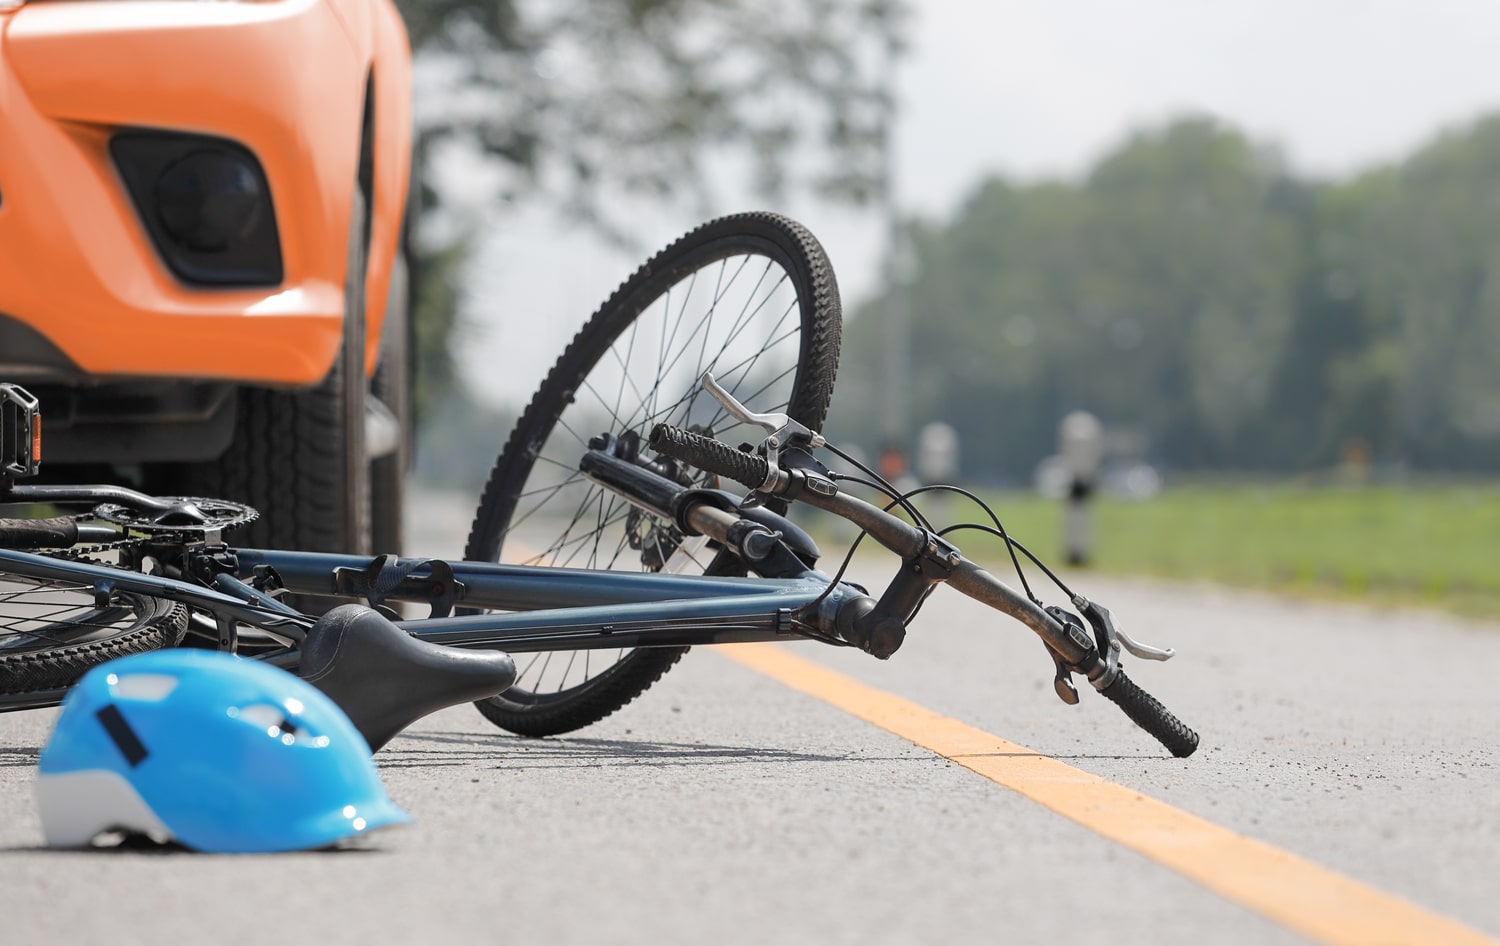 Why Does Bexar County Have So Many Fatal Bicycle Crashes?